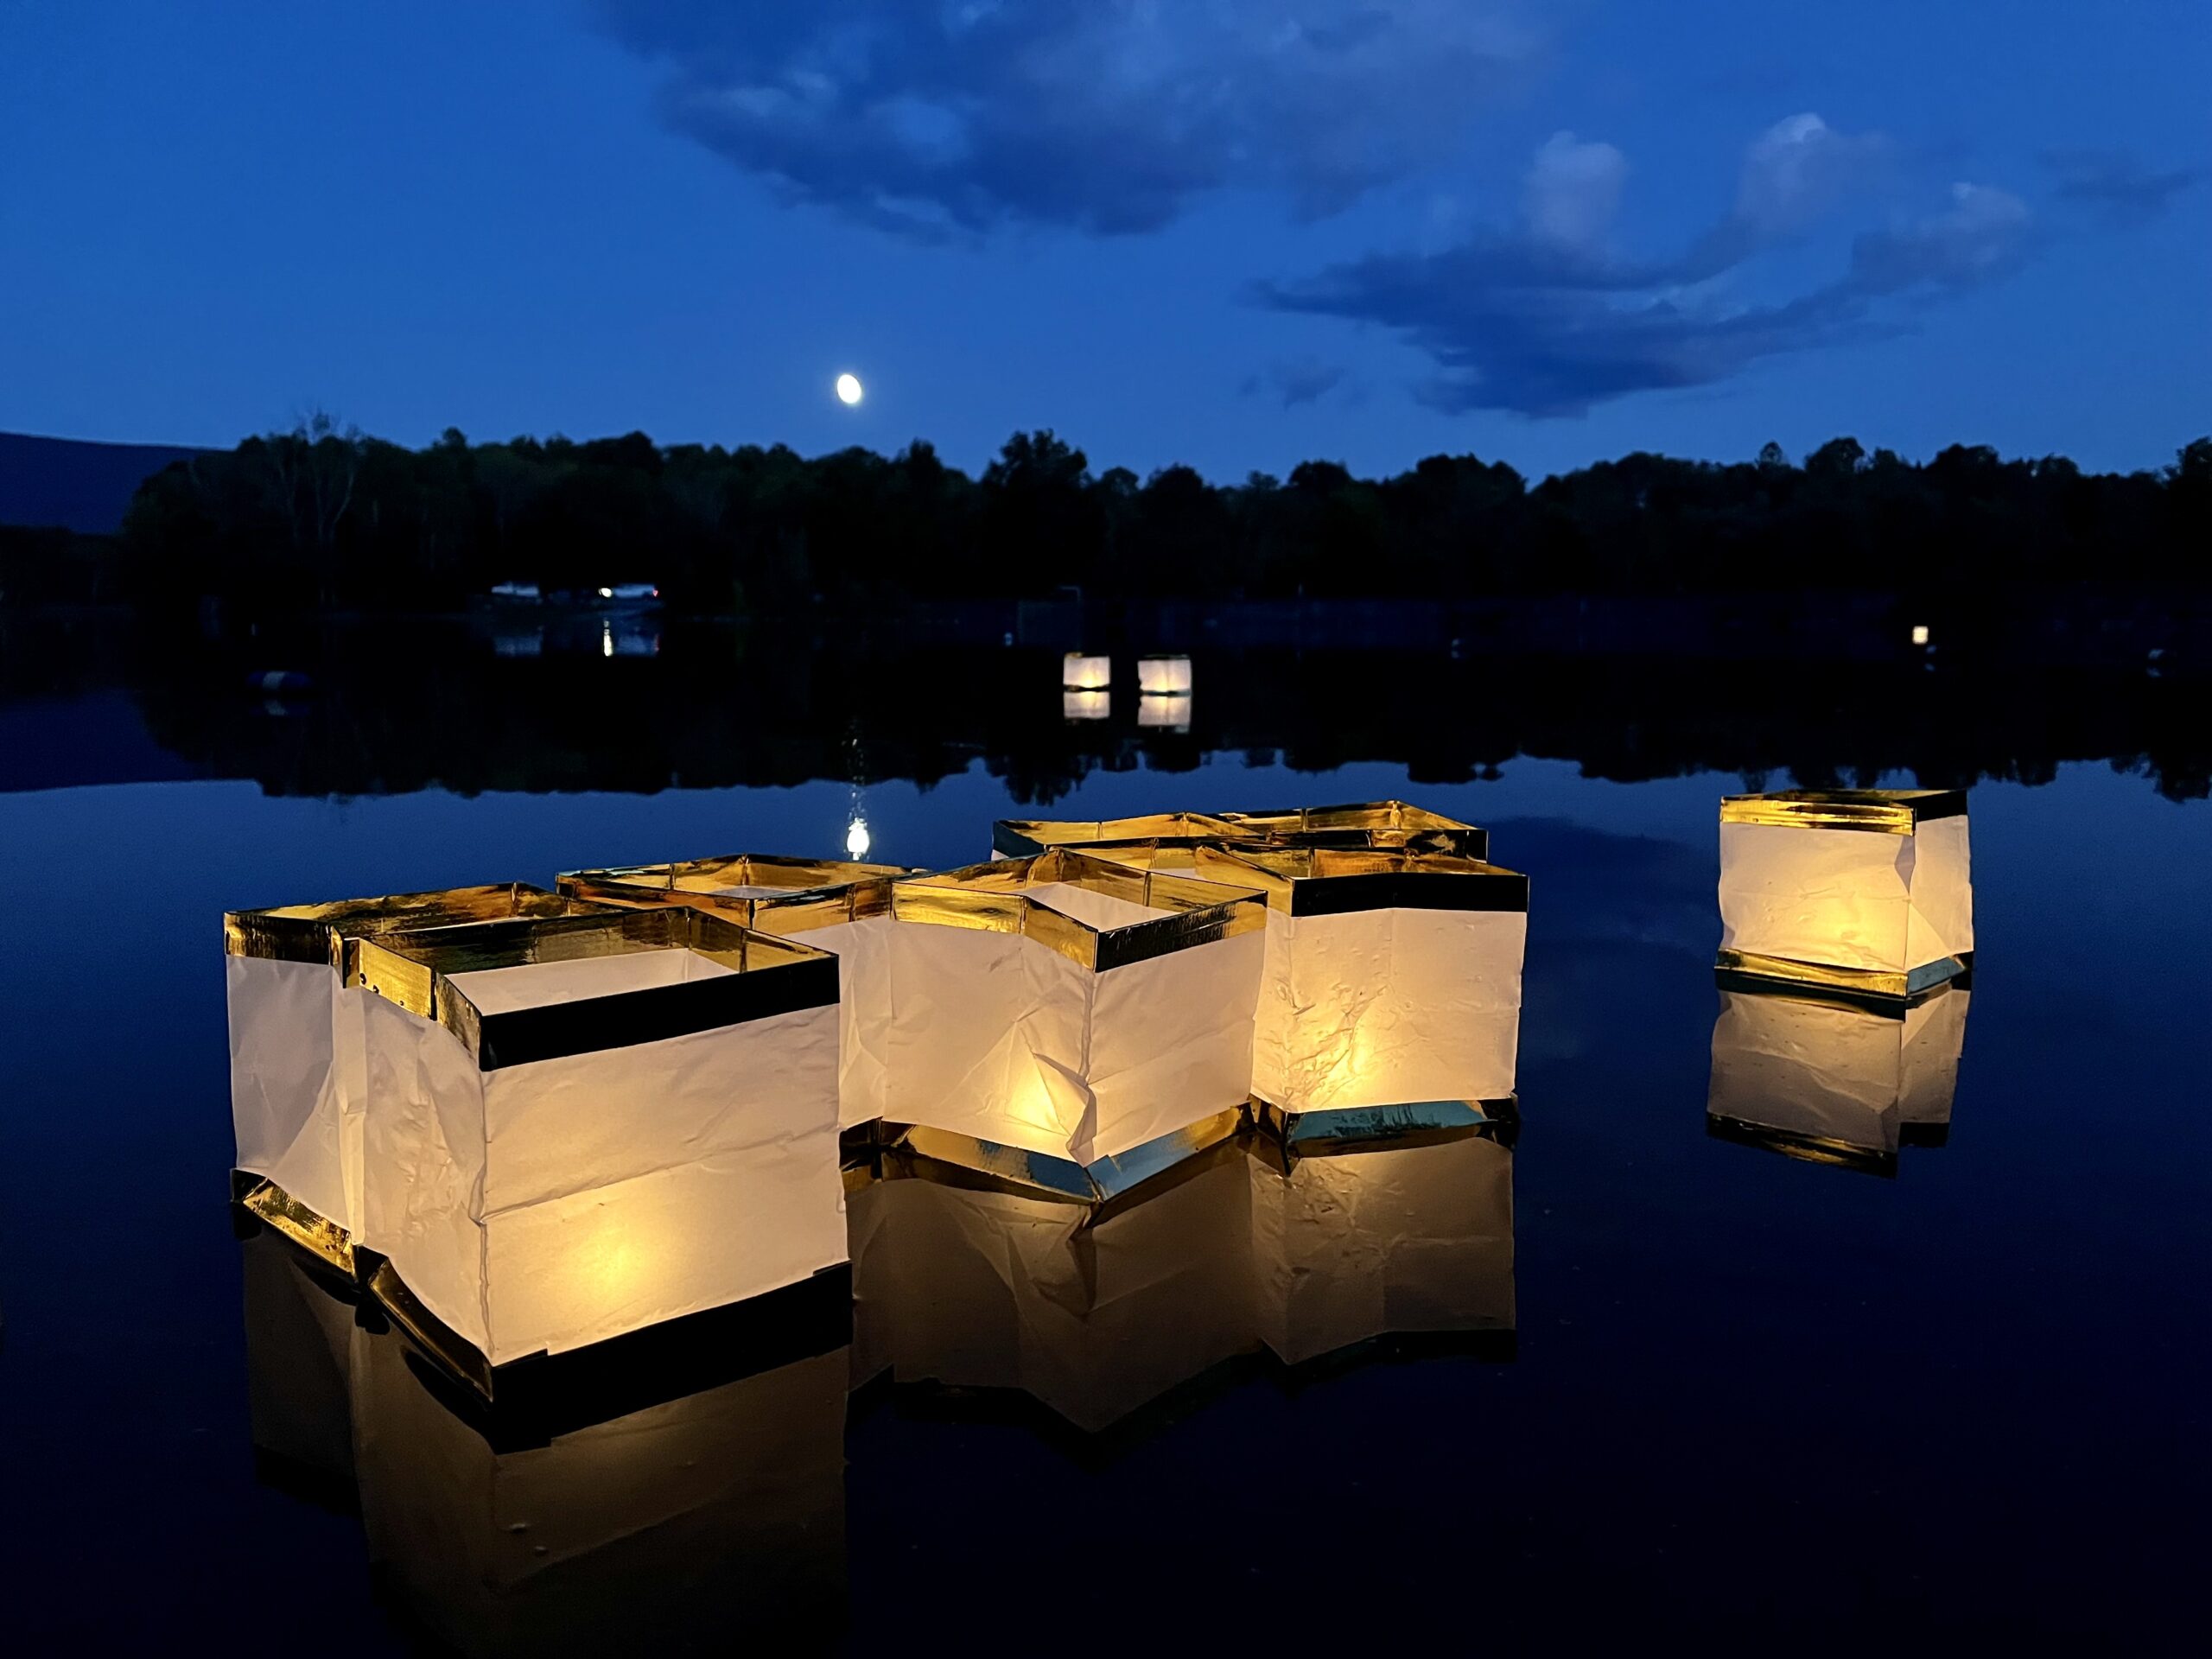 Candle-lit paper lanterns float on a dark lake against a darkening blue sky with the outline of a treeline and a full moon in the background.